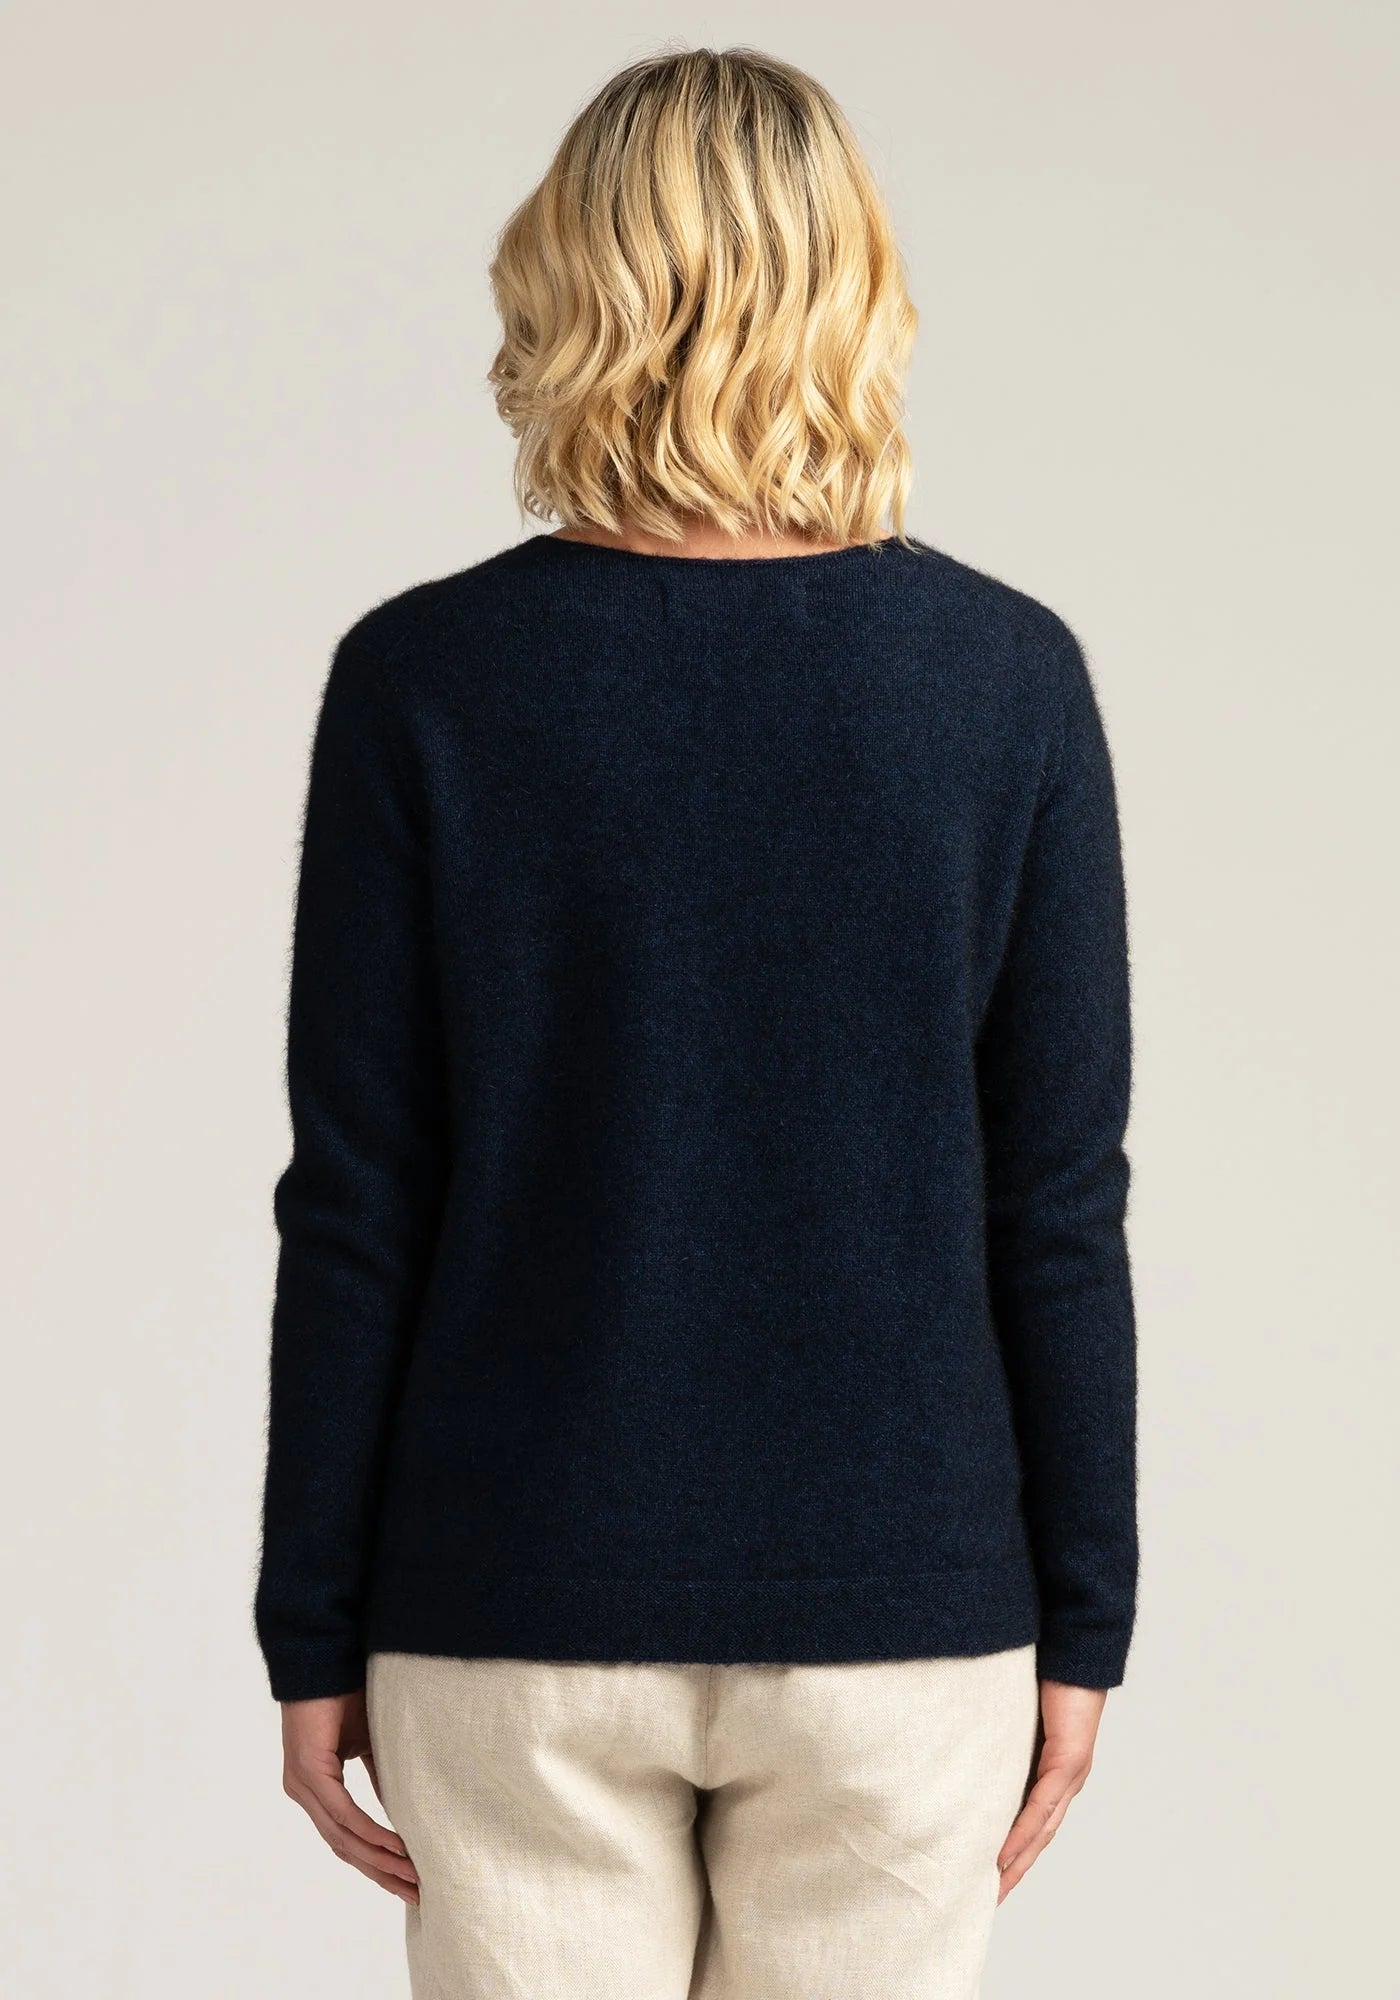 Upgrade your knitwear collection with our navy merino wool jumper. Style and warmth combined!